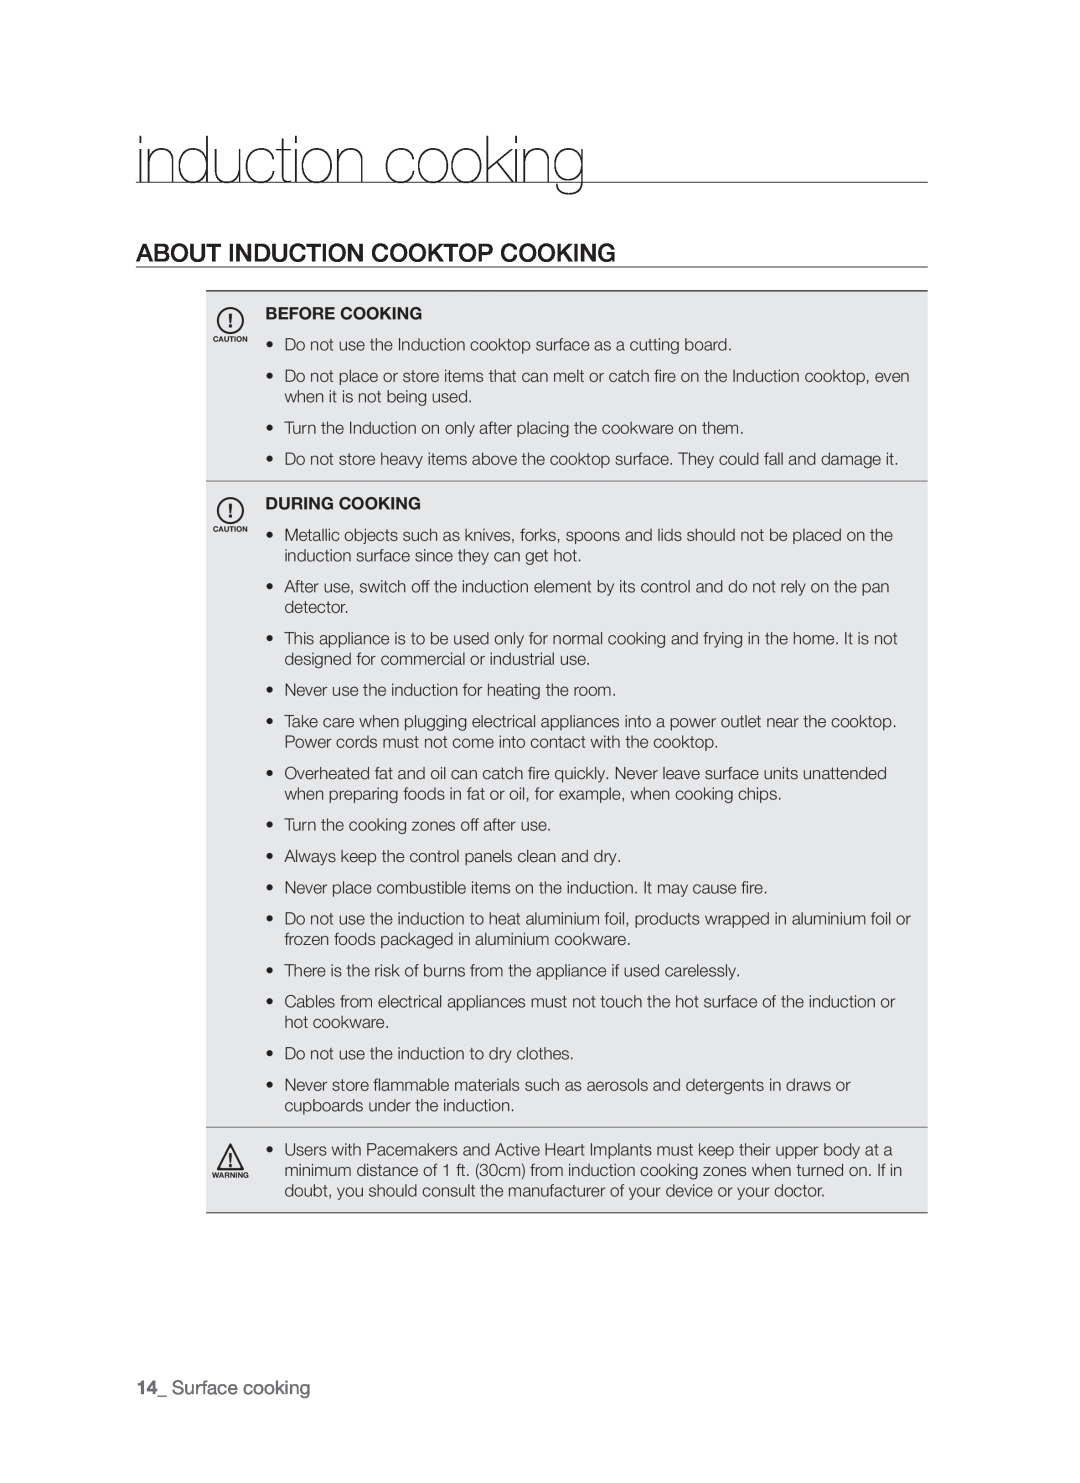 Samsung FTQ307NWGX user manual induction cooking, About induction cooktop cooking, Surface cooking 